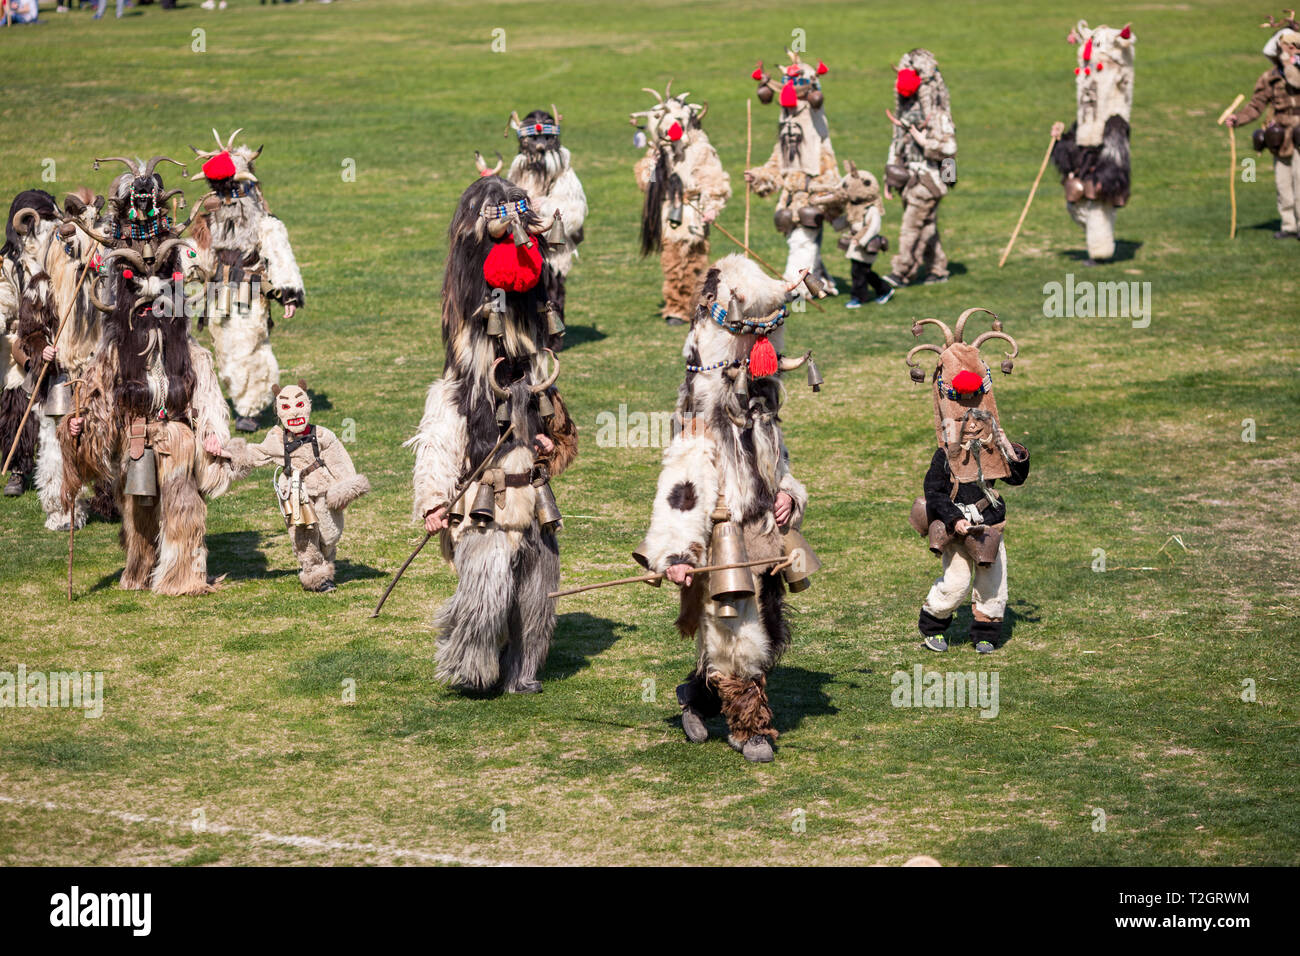 VARVARA, BULGARIA - MARCH 24, 2019: Moment from National Festival Dervish Varvara presents traditions of Bulgarian Kuker Games. Performers present the Stock Photo